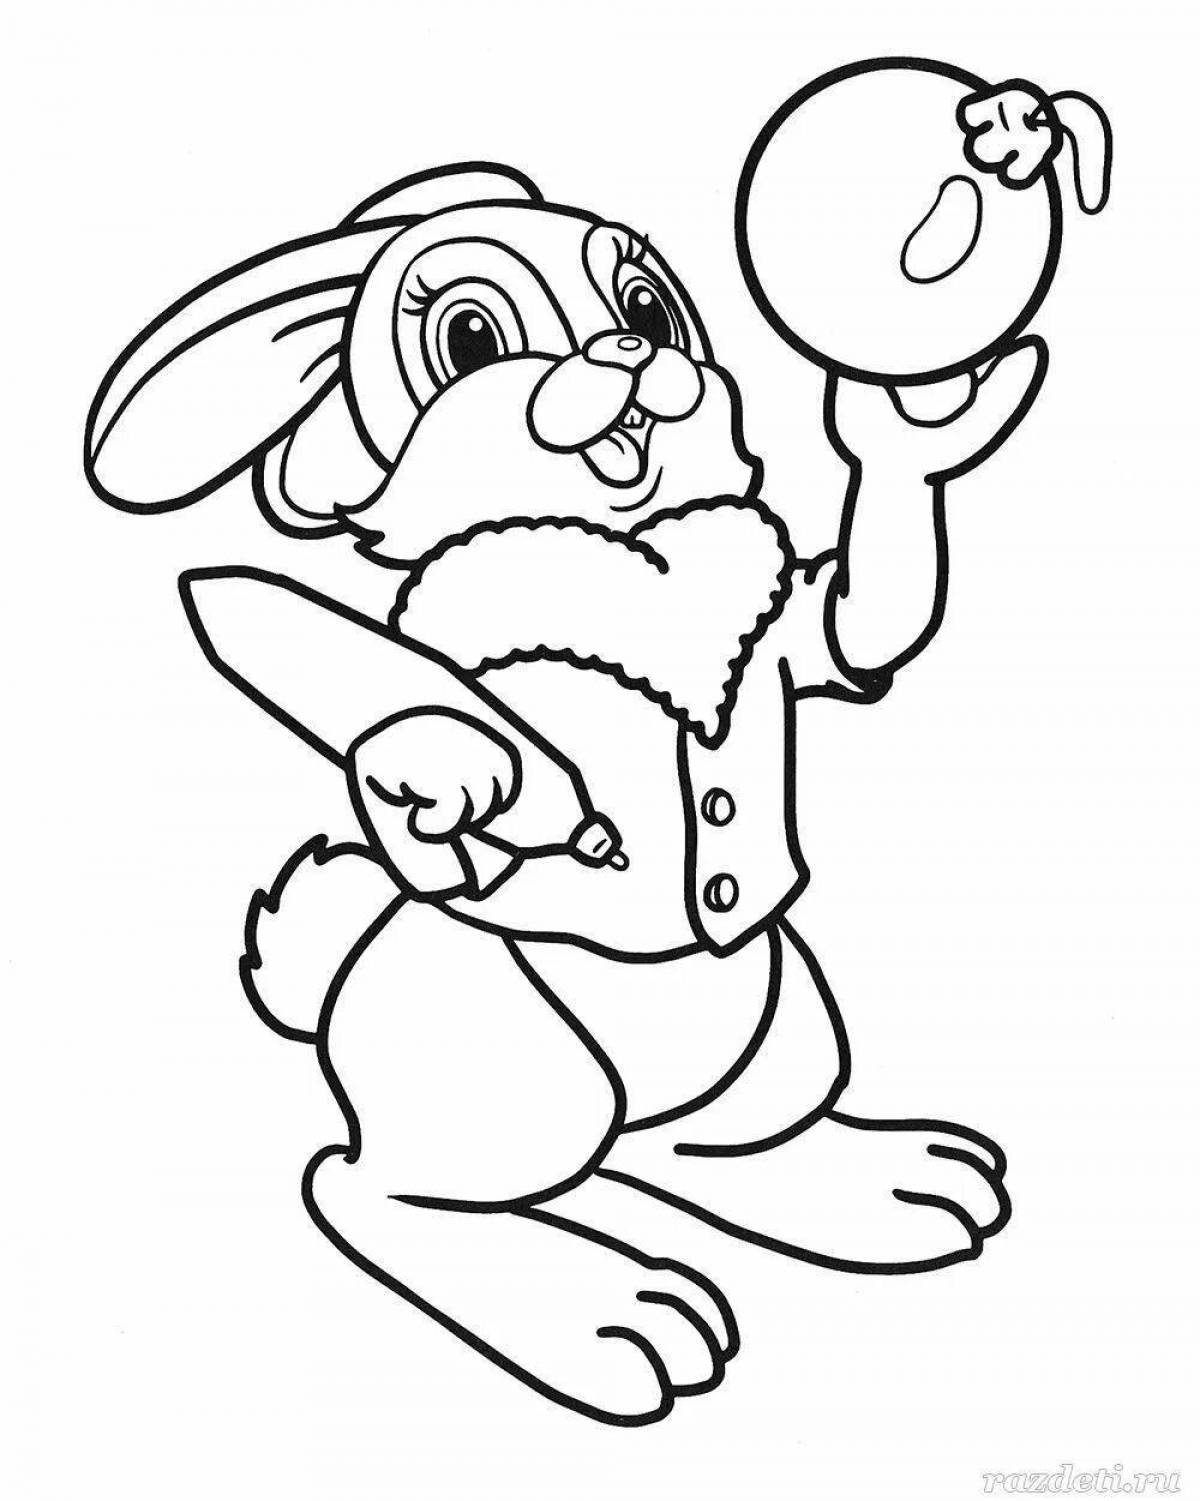 Amazing new year bunny coloring book